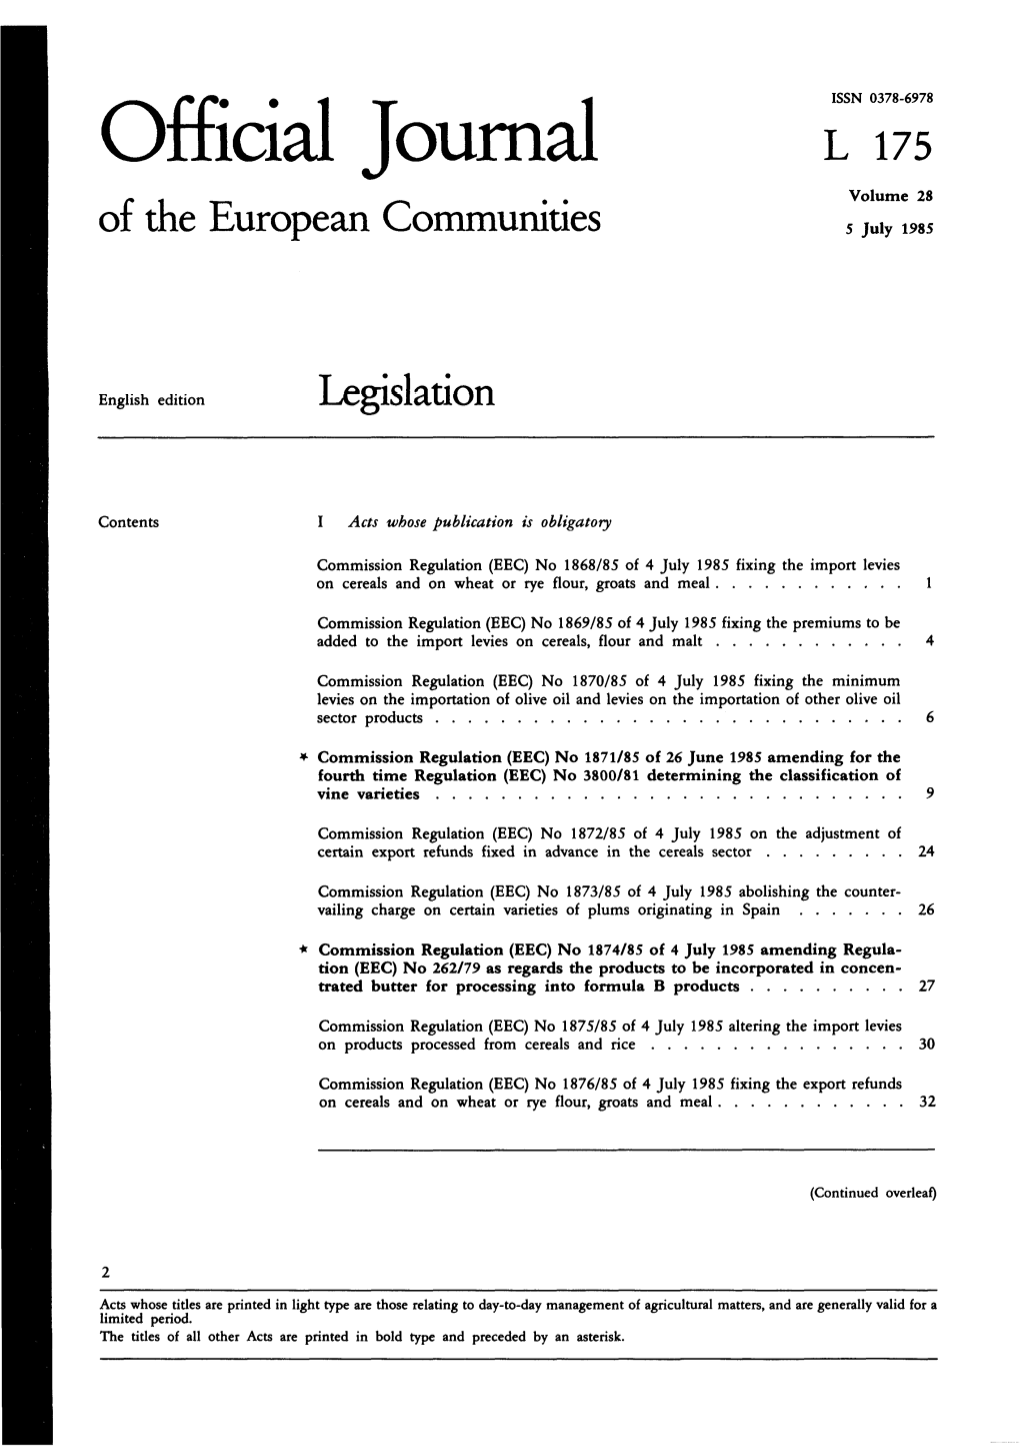 Of the European Communities 5 July 1985